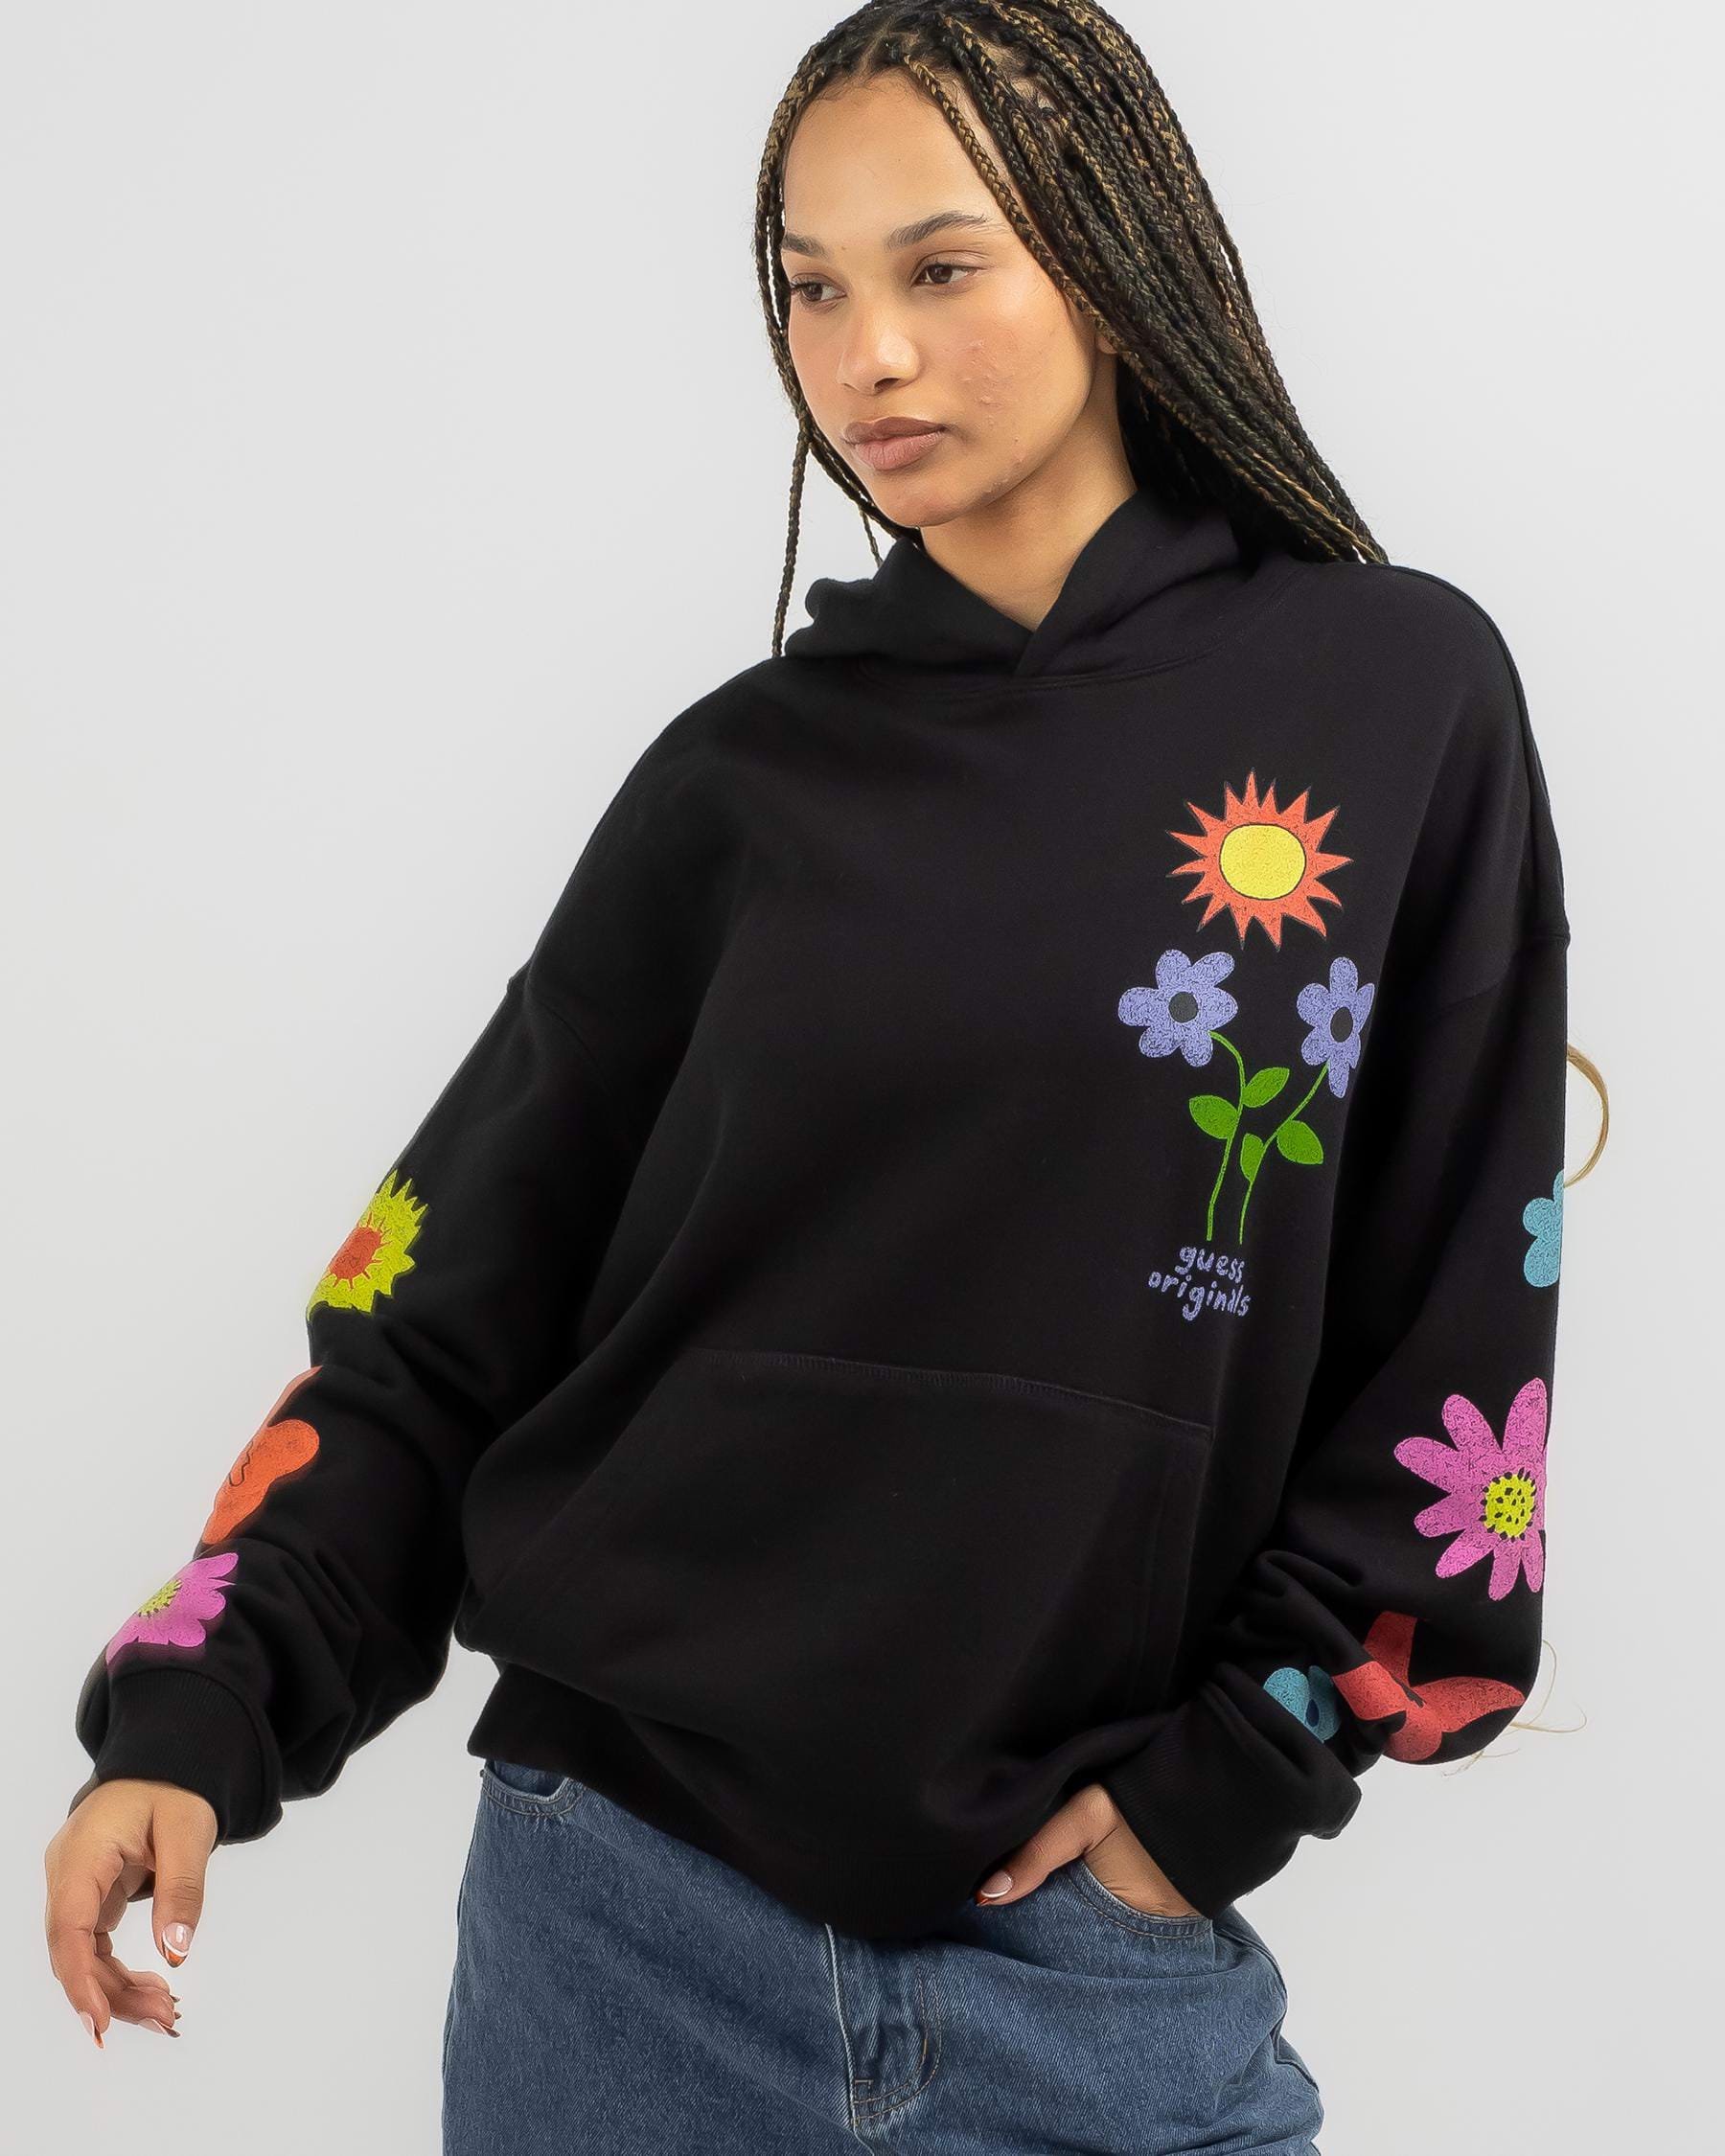 GUESS Originals Earth Day Sunshine Hoodie In Jet Black Multi